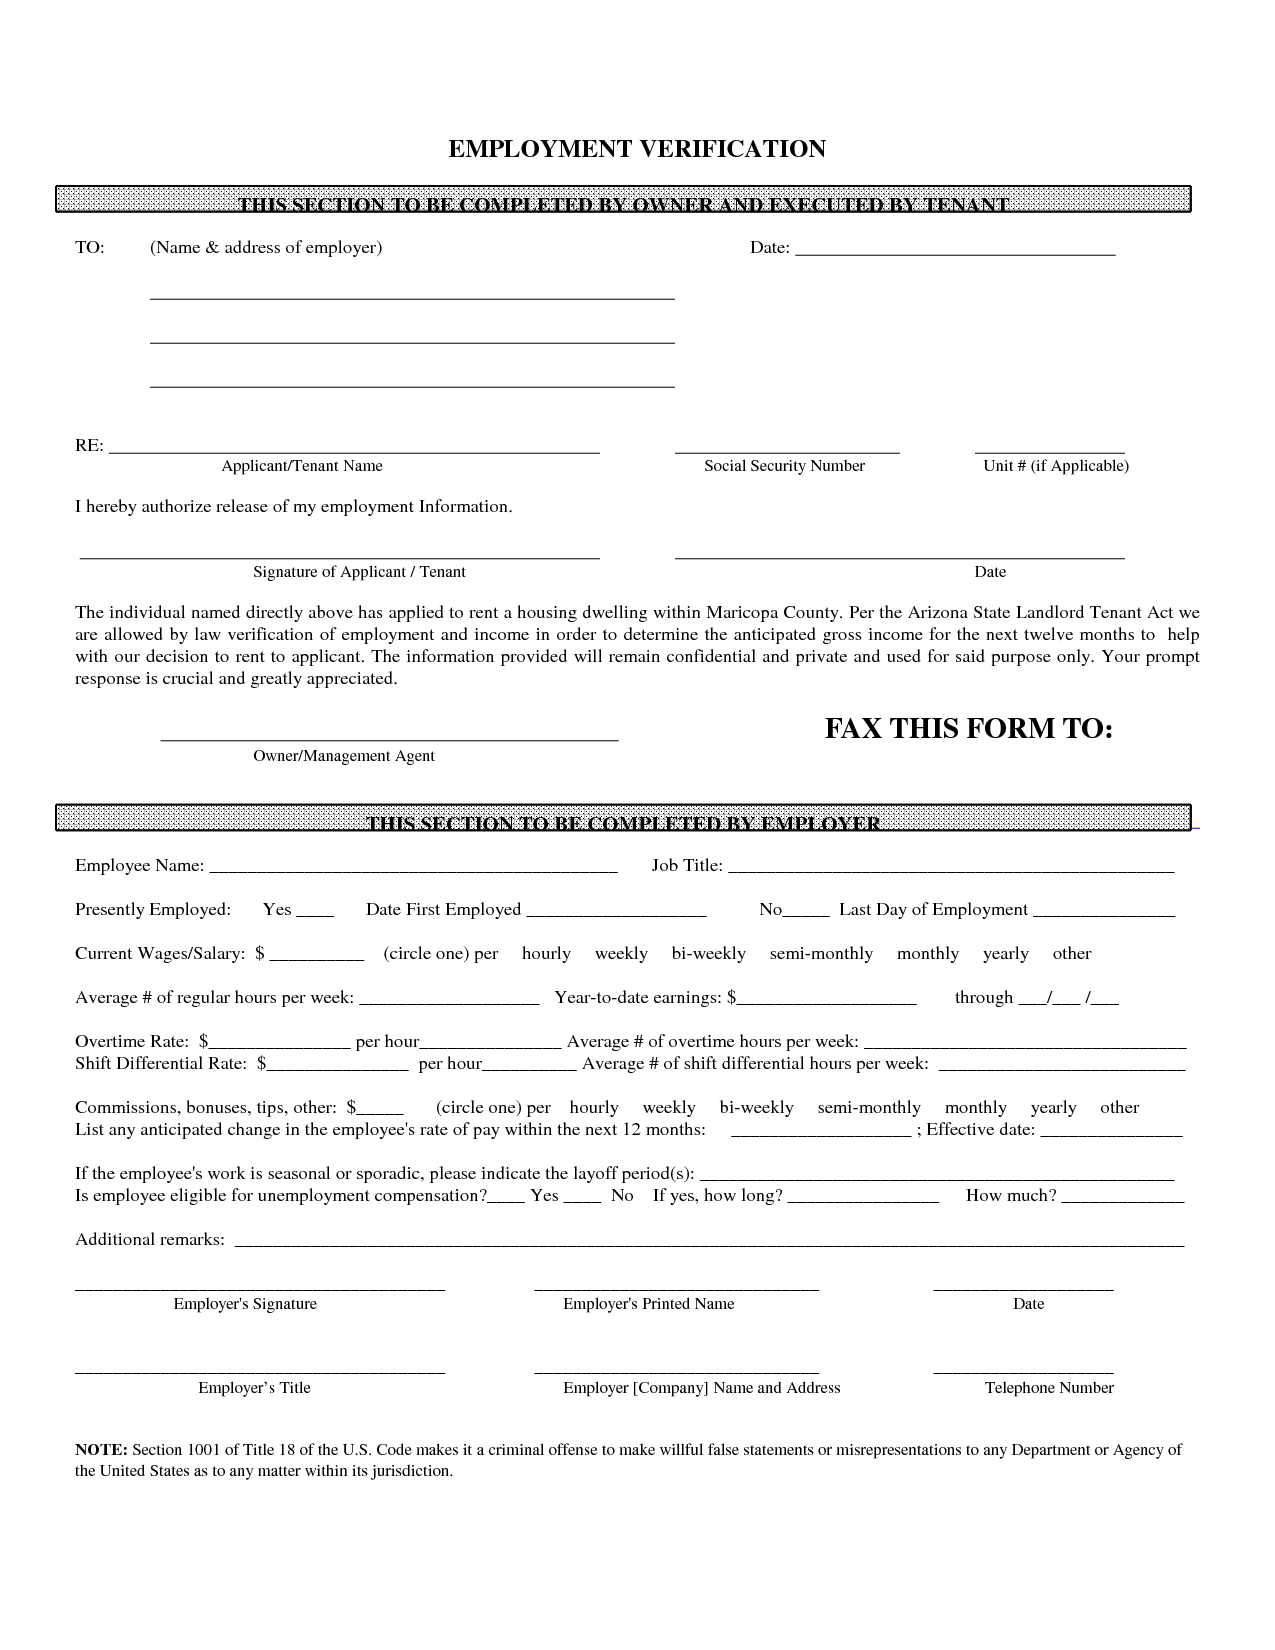 income-verification-form-template-free-printable-documents